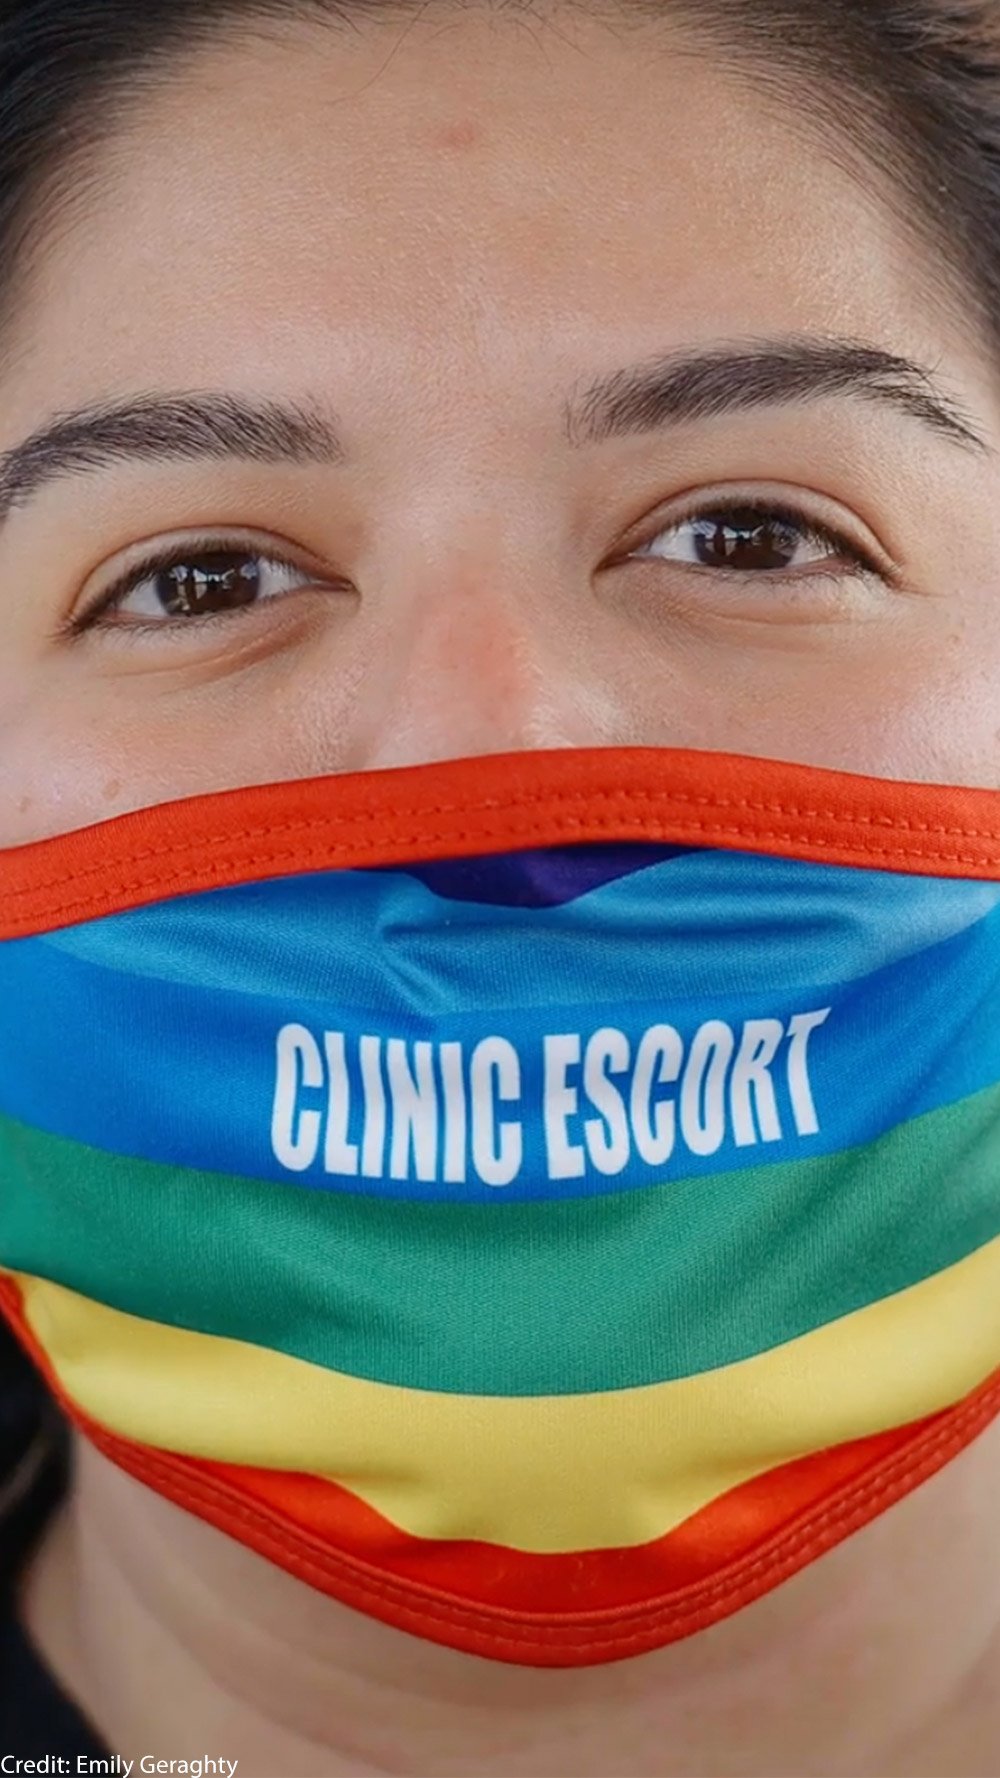 A close-up of Mariceli Alegria who's wearing a rainbow facemask with the printed words "Clinic Escort".